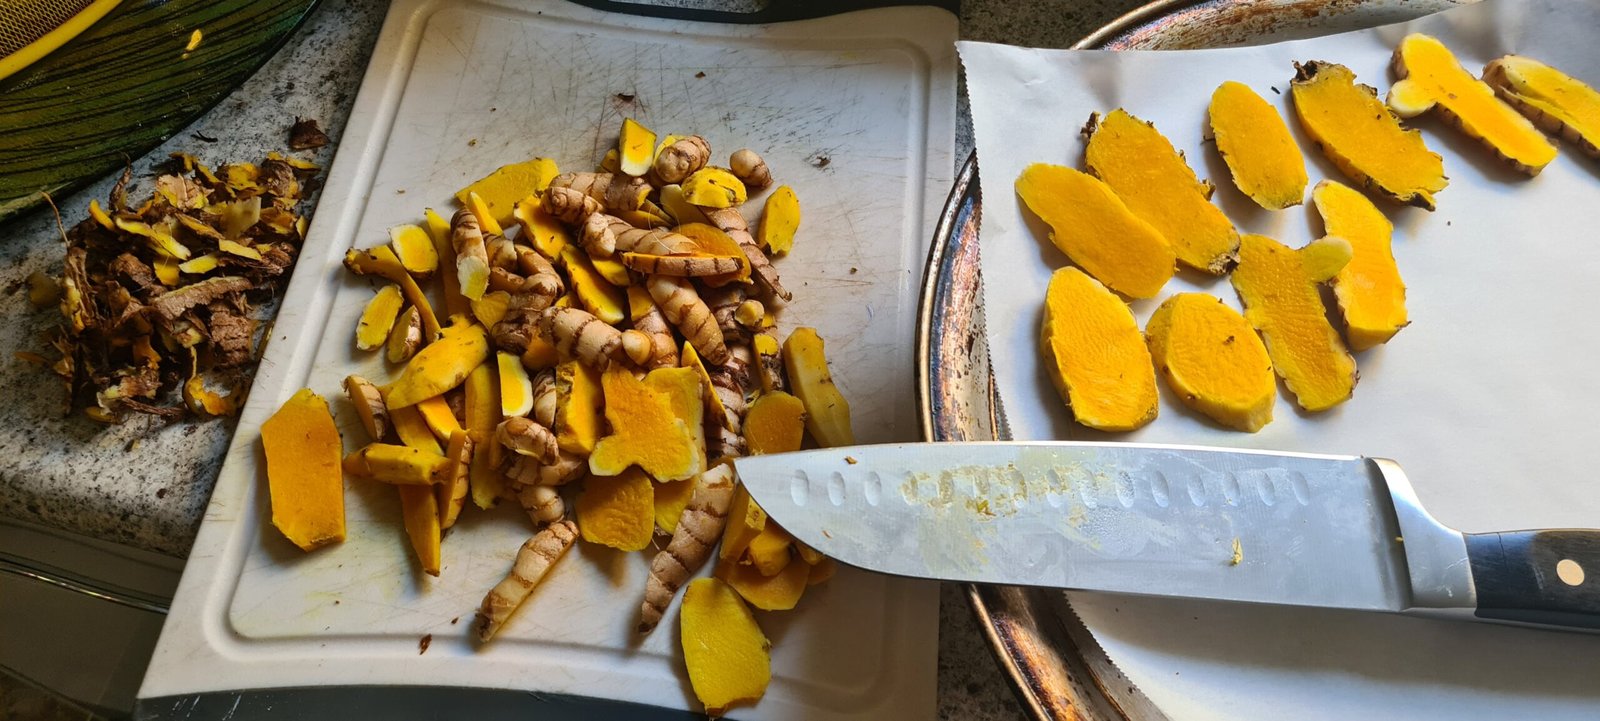 peeled and sliced turmeric. Only the large pieces were peeled.